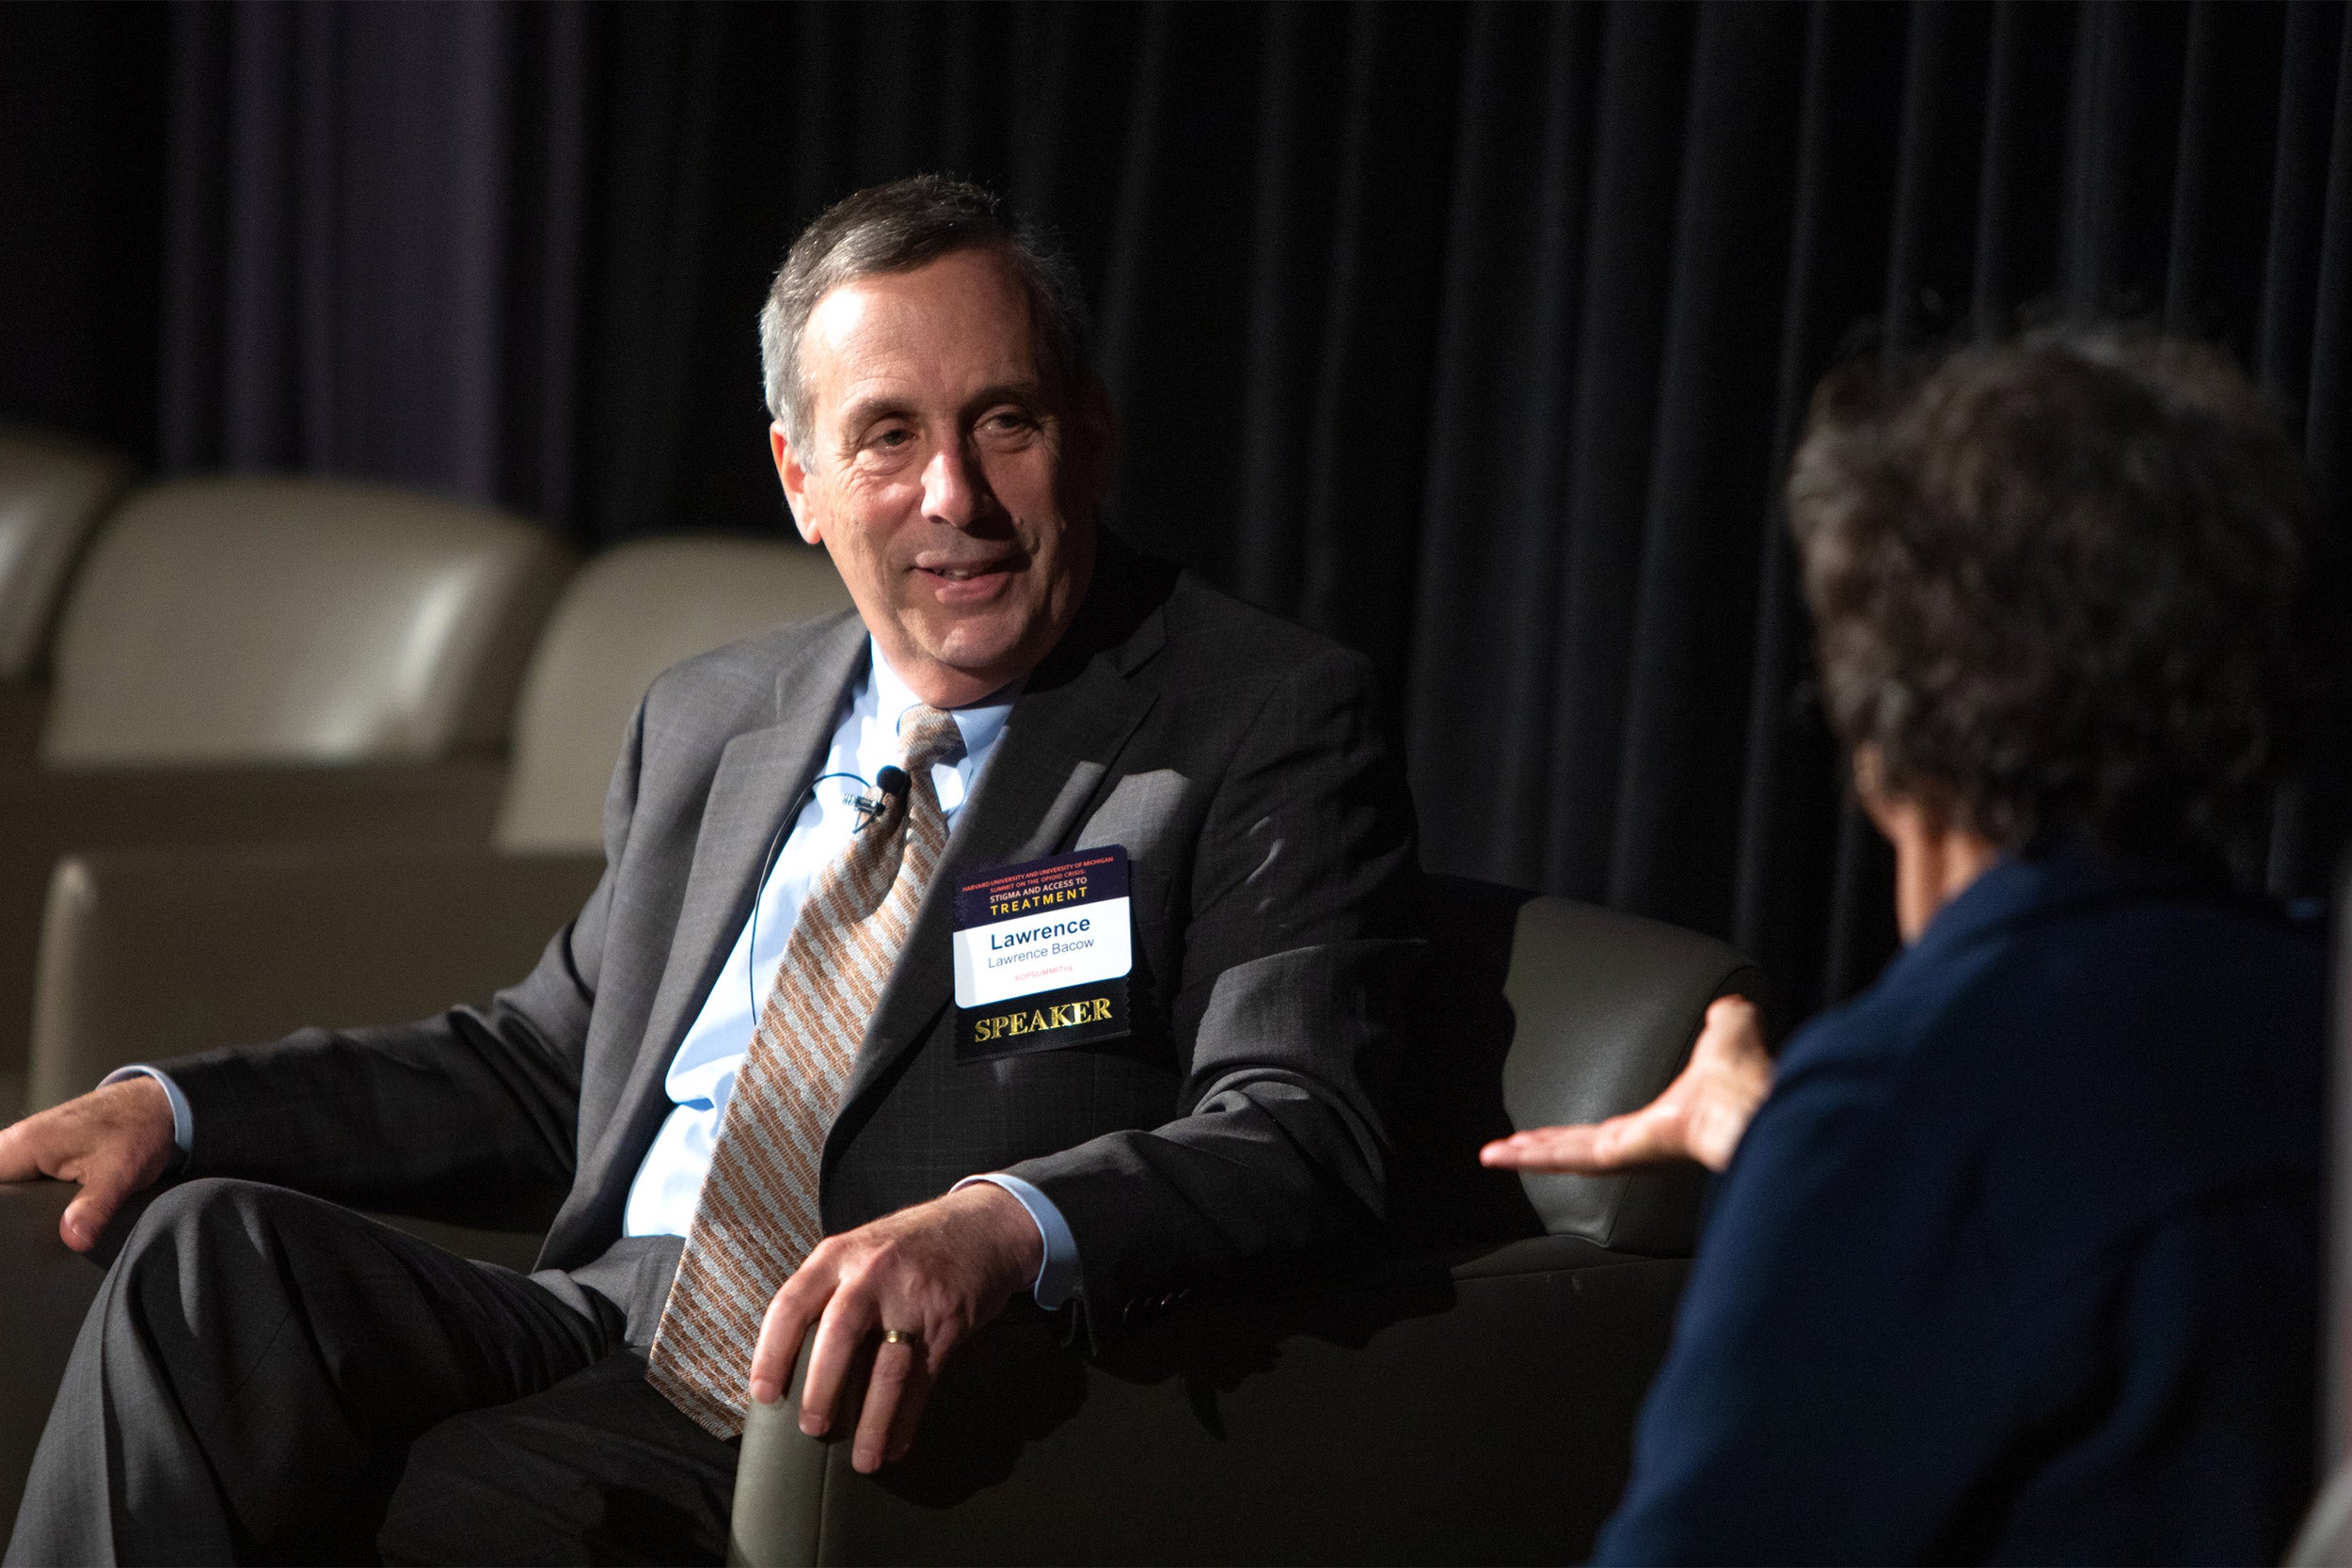 Harvard President Larry Bacow and Mary Bassett discuss the issue.